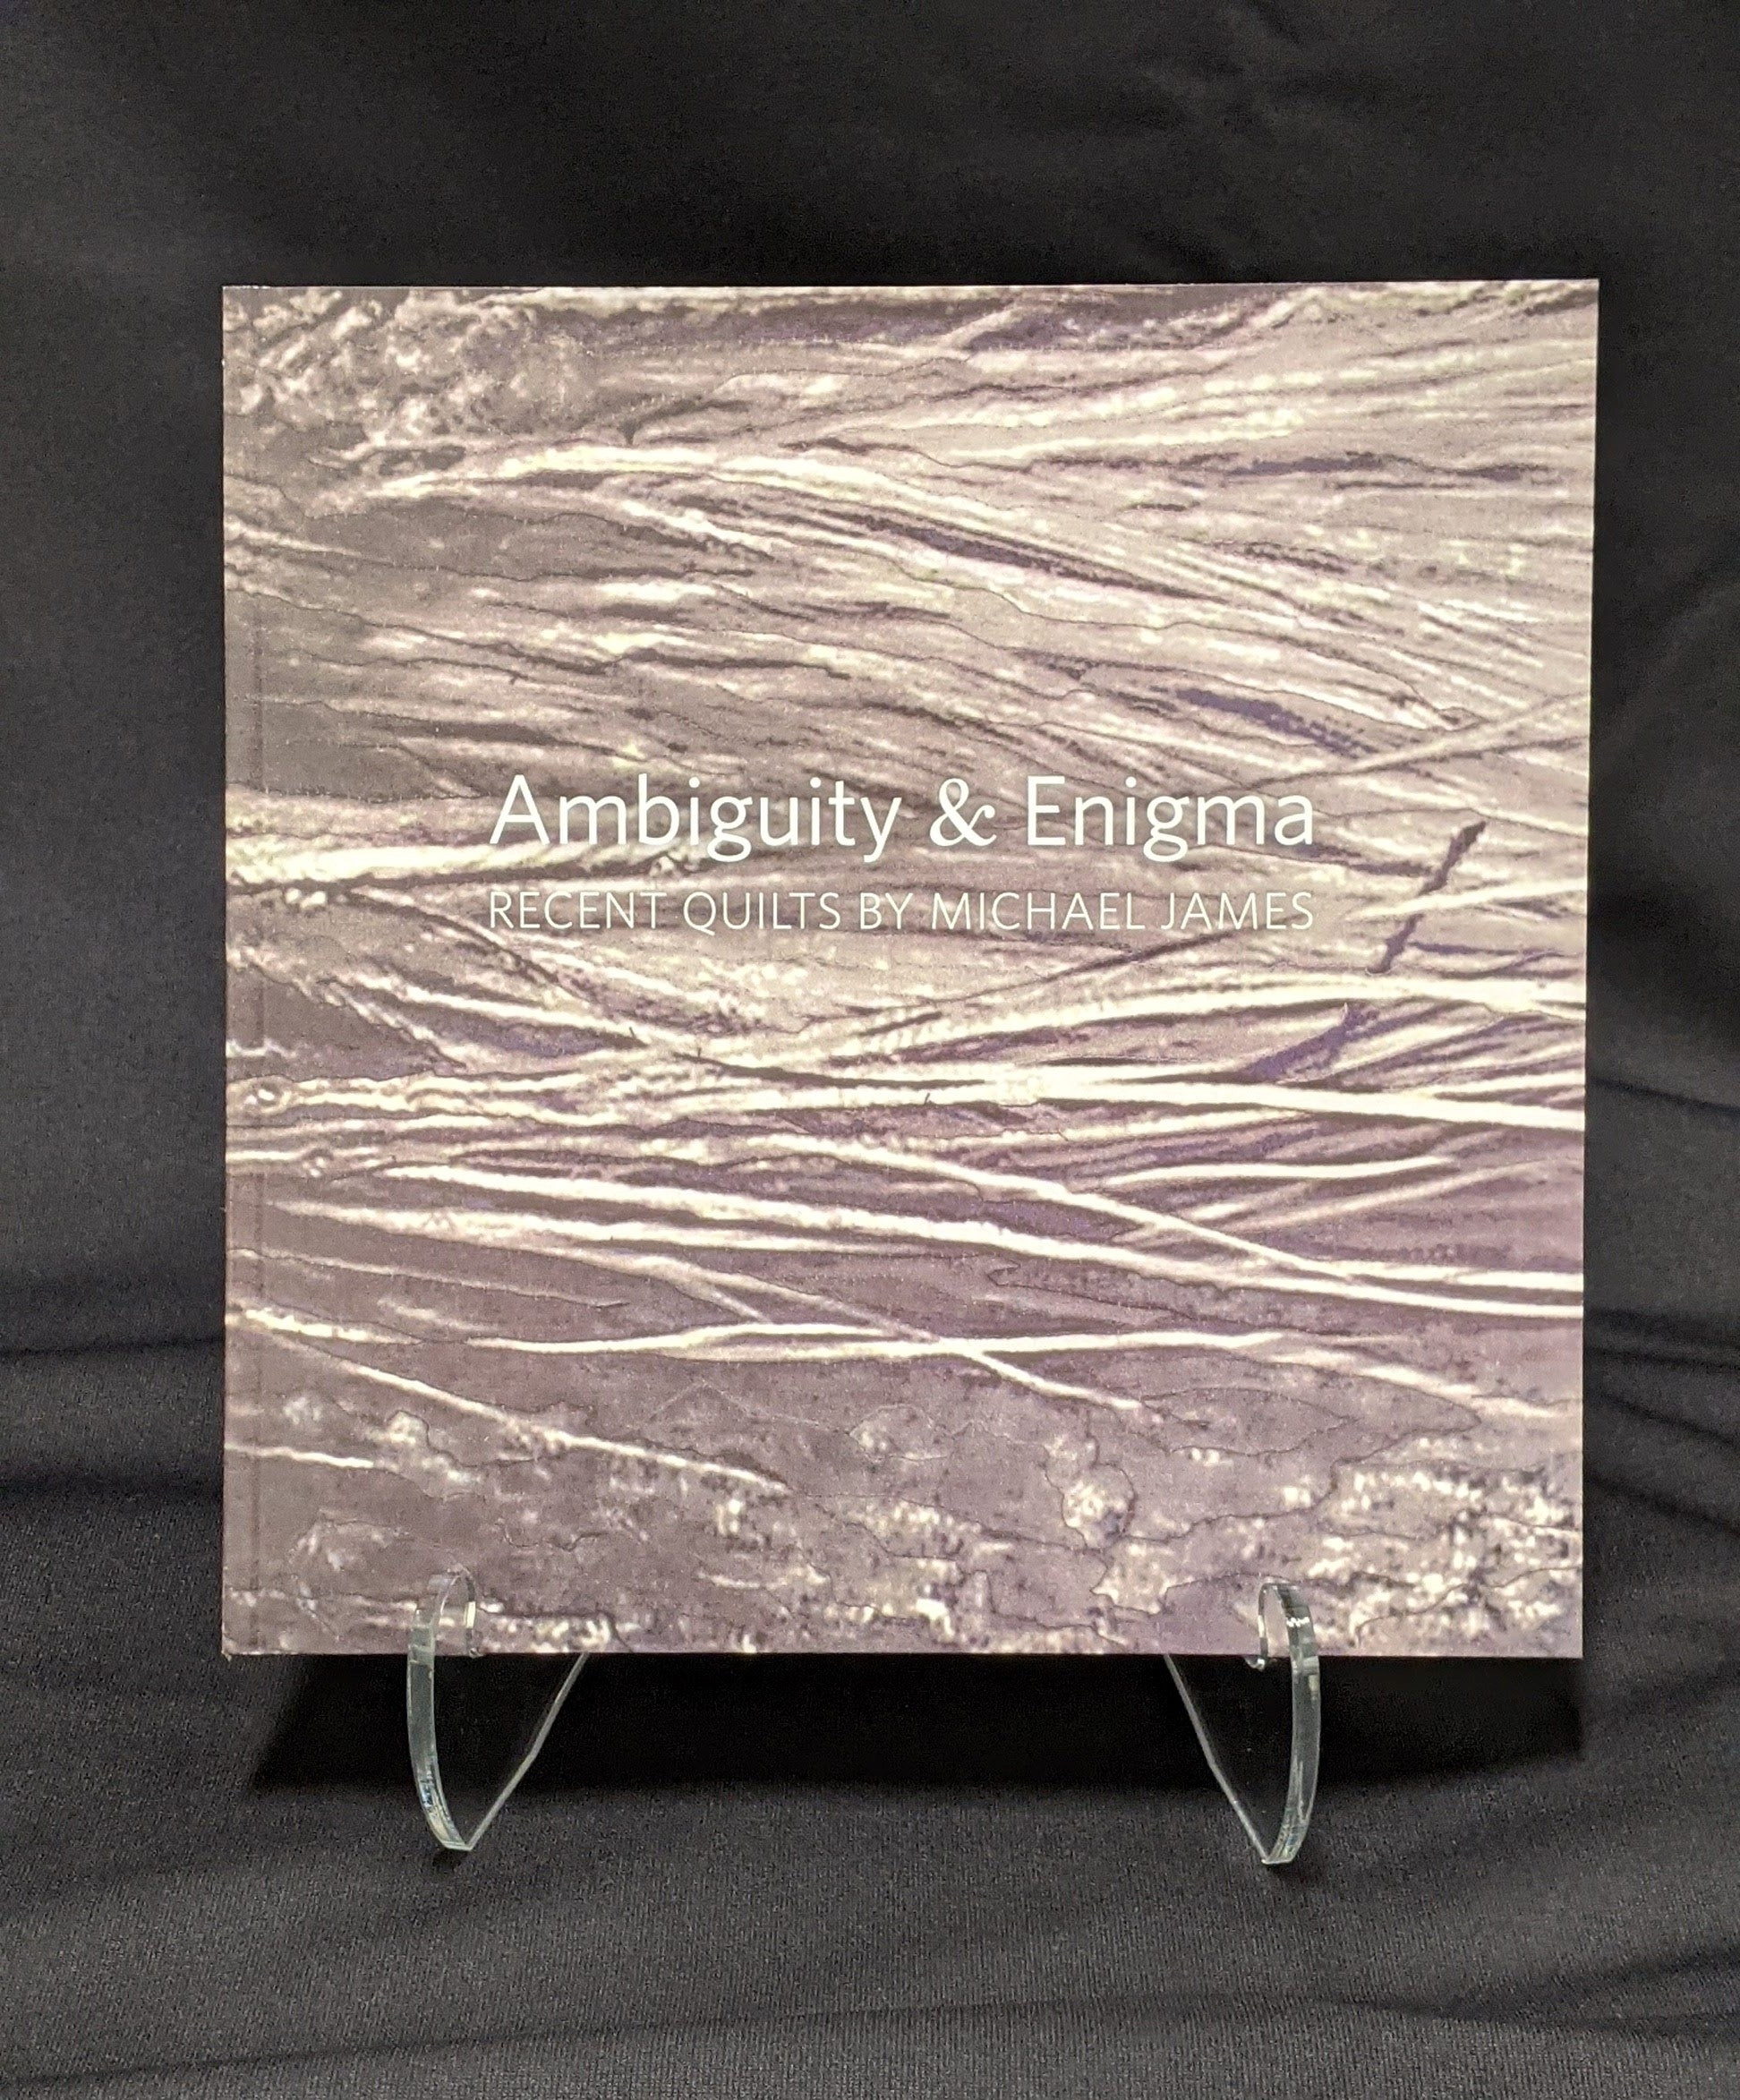 Recent Quilts By Michael James  Ambiguity & Enigma